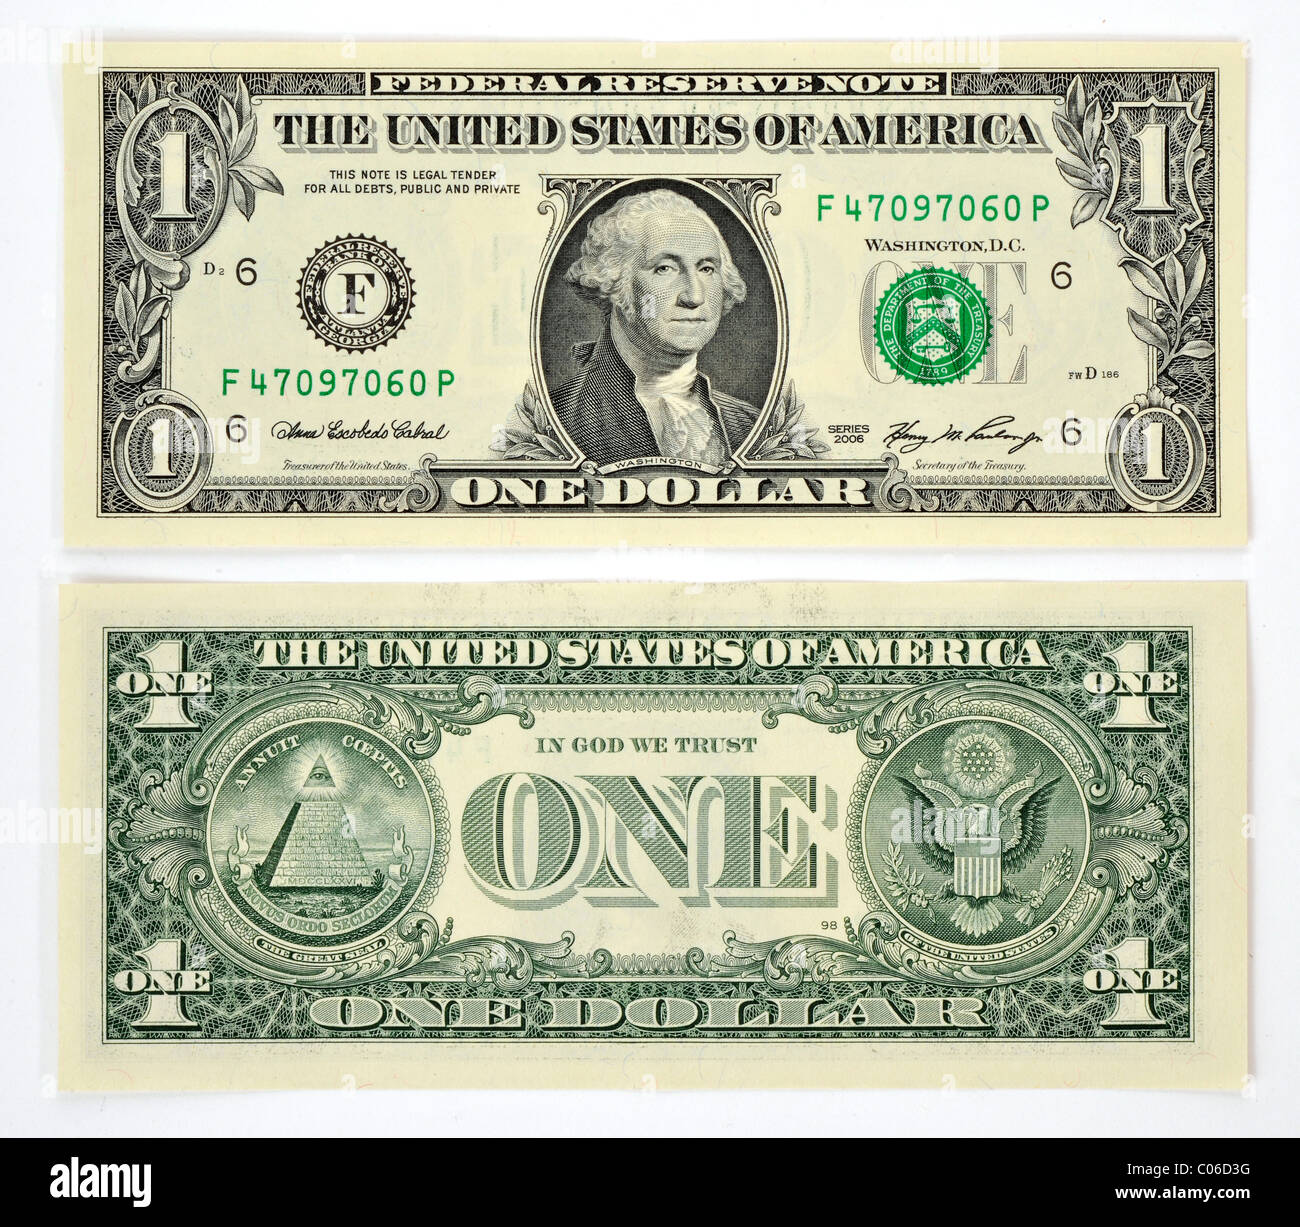 1 U.S. dollar banknote, front and back Stock Photo